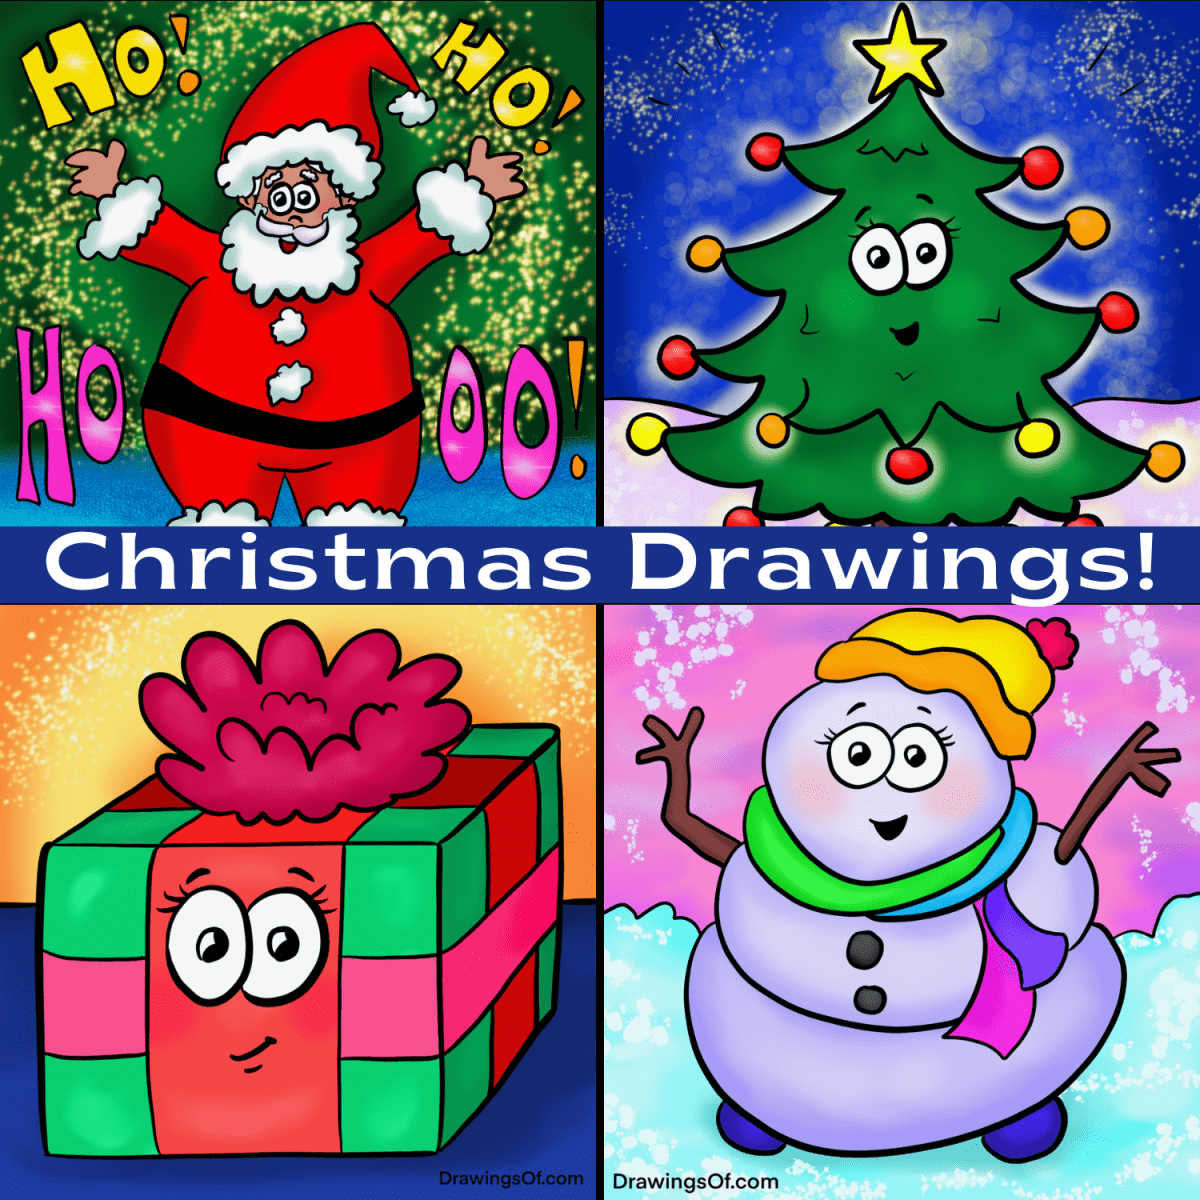 How to Draw Christmas Characters - YouTube